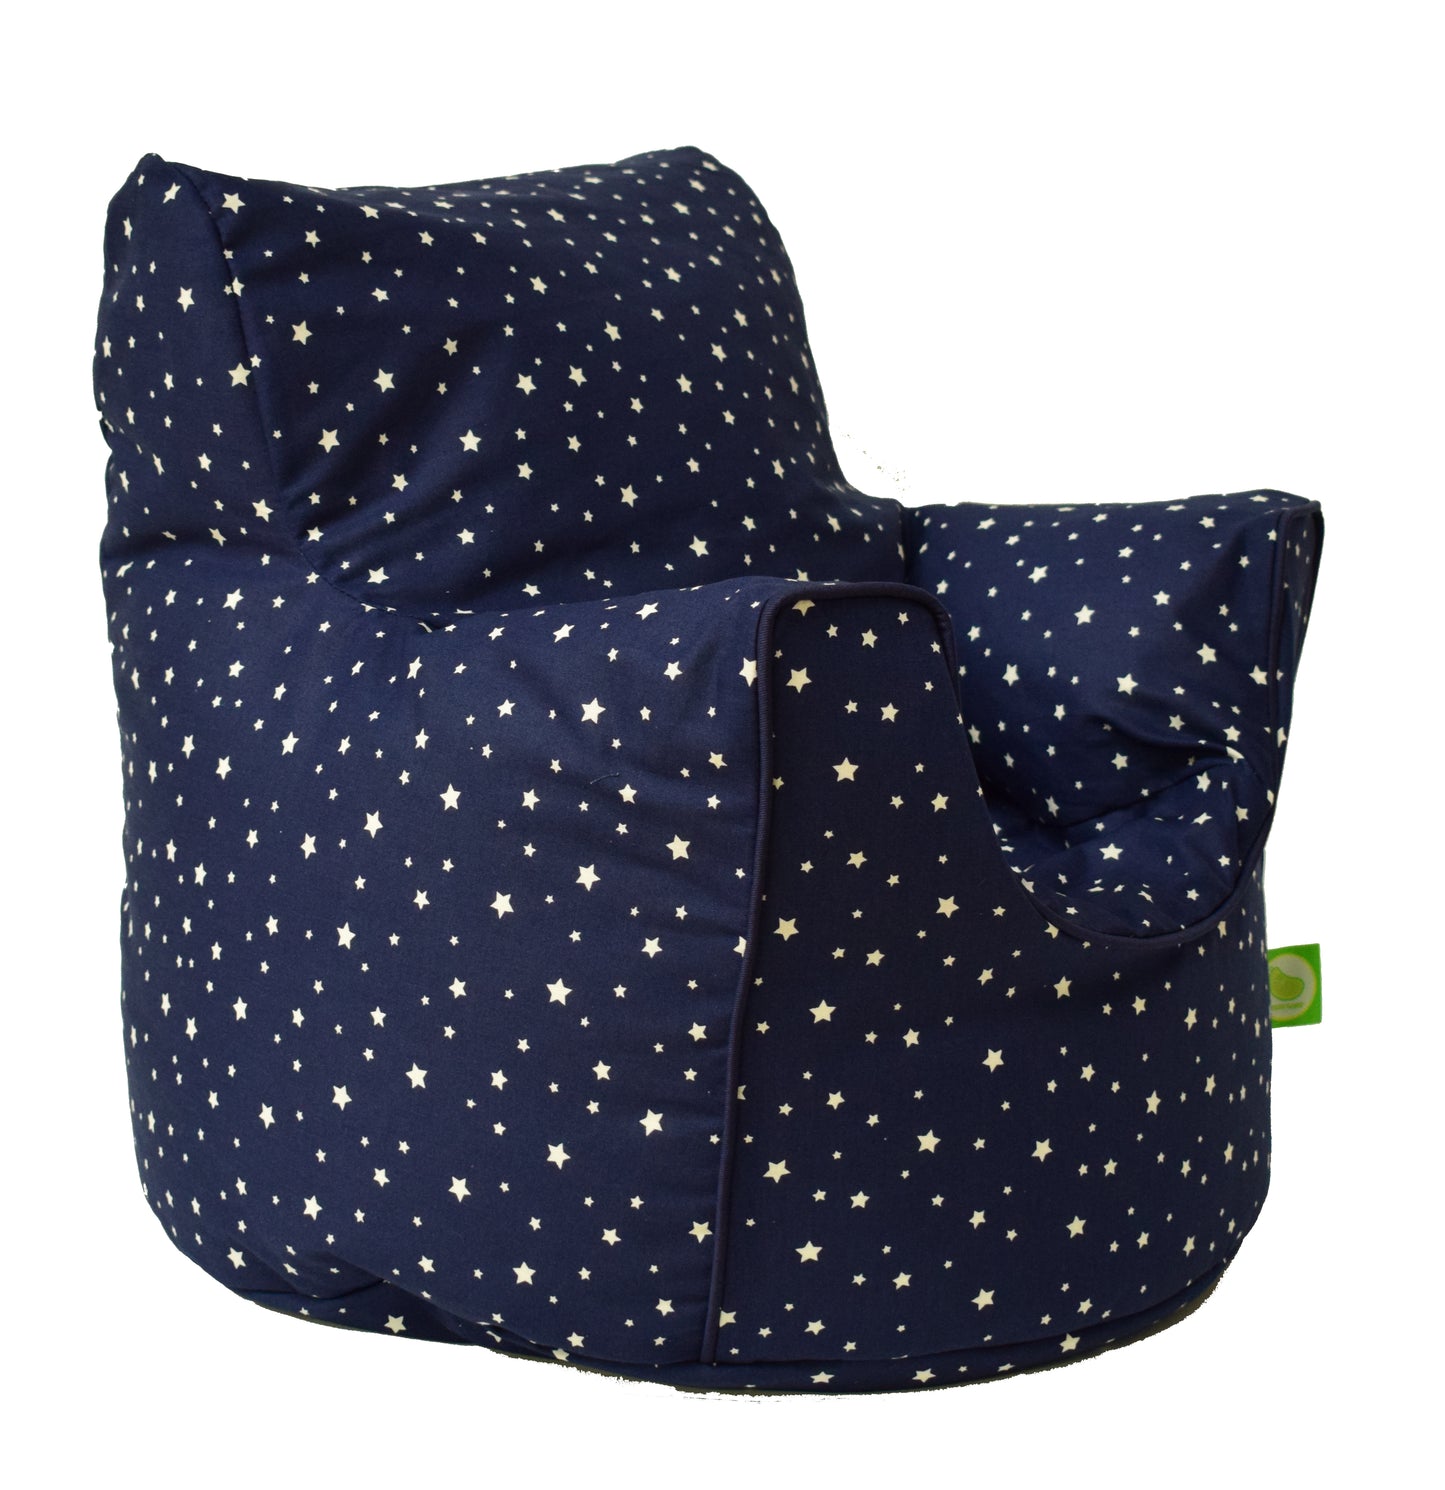 Cotton Navy Stars Bean Bag Arm Chair with Beans Child / Teen size